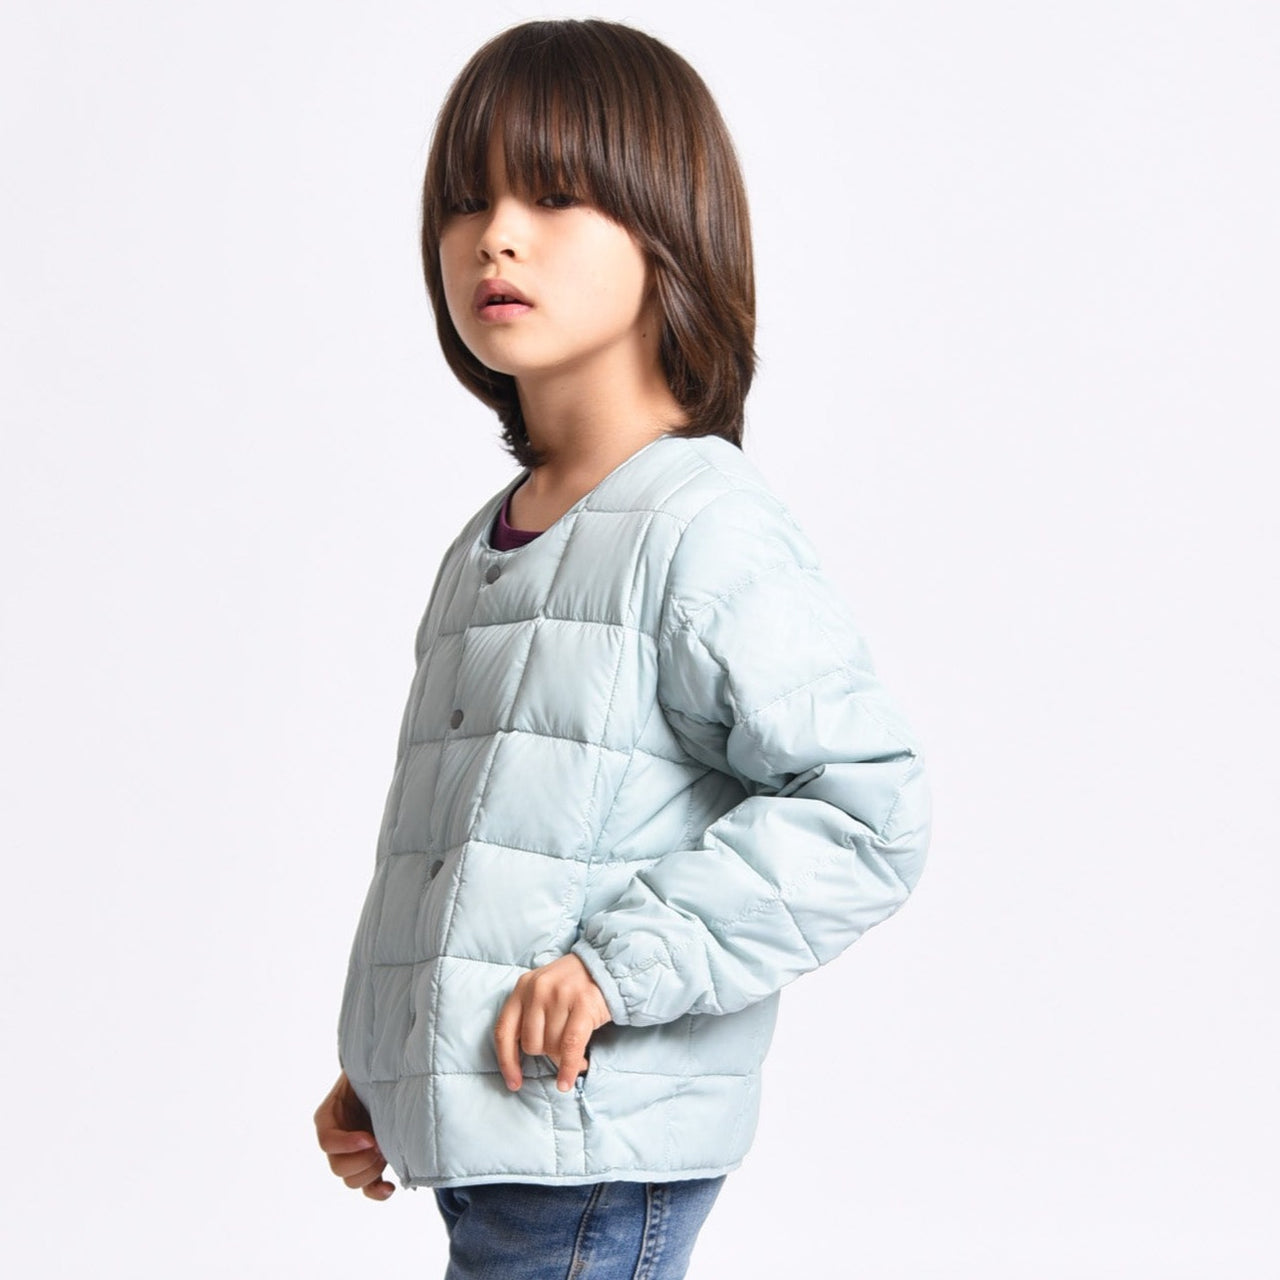 Drake General Store - TAION Kids Crew Neck Button Down Jacket - Ice Mint